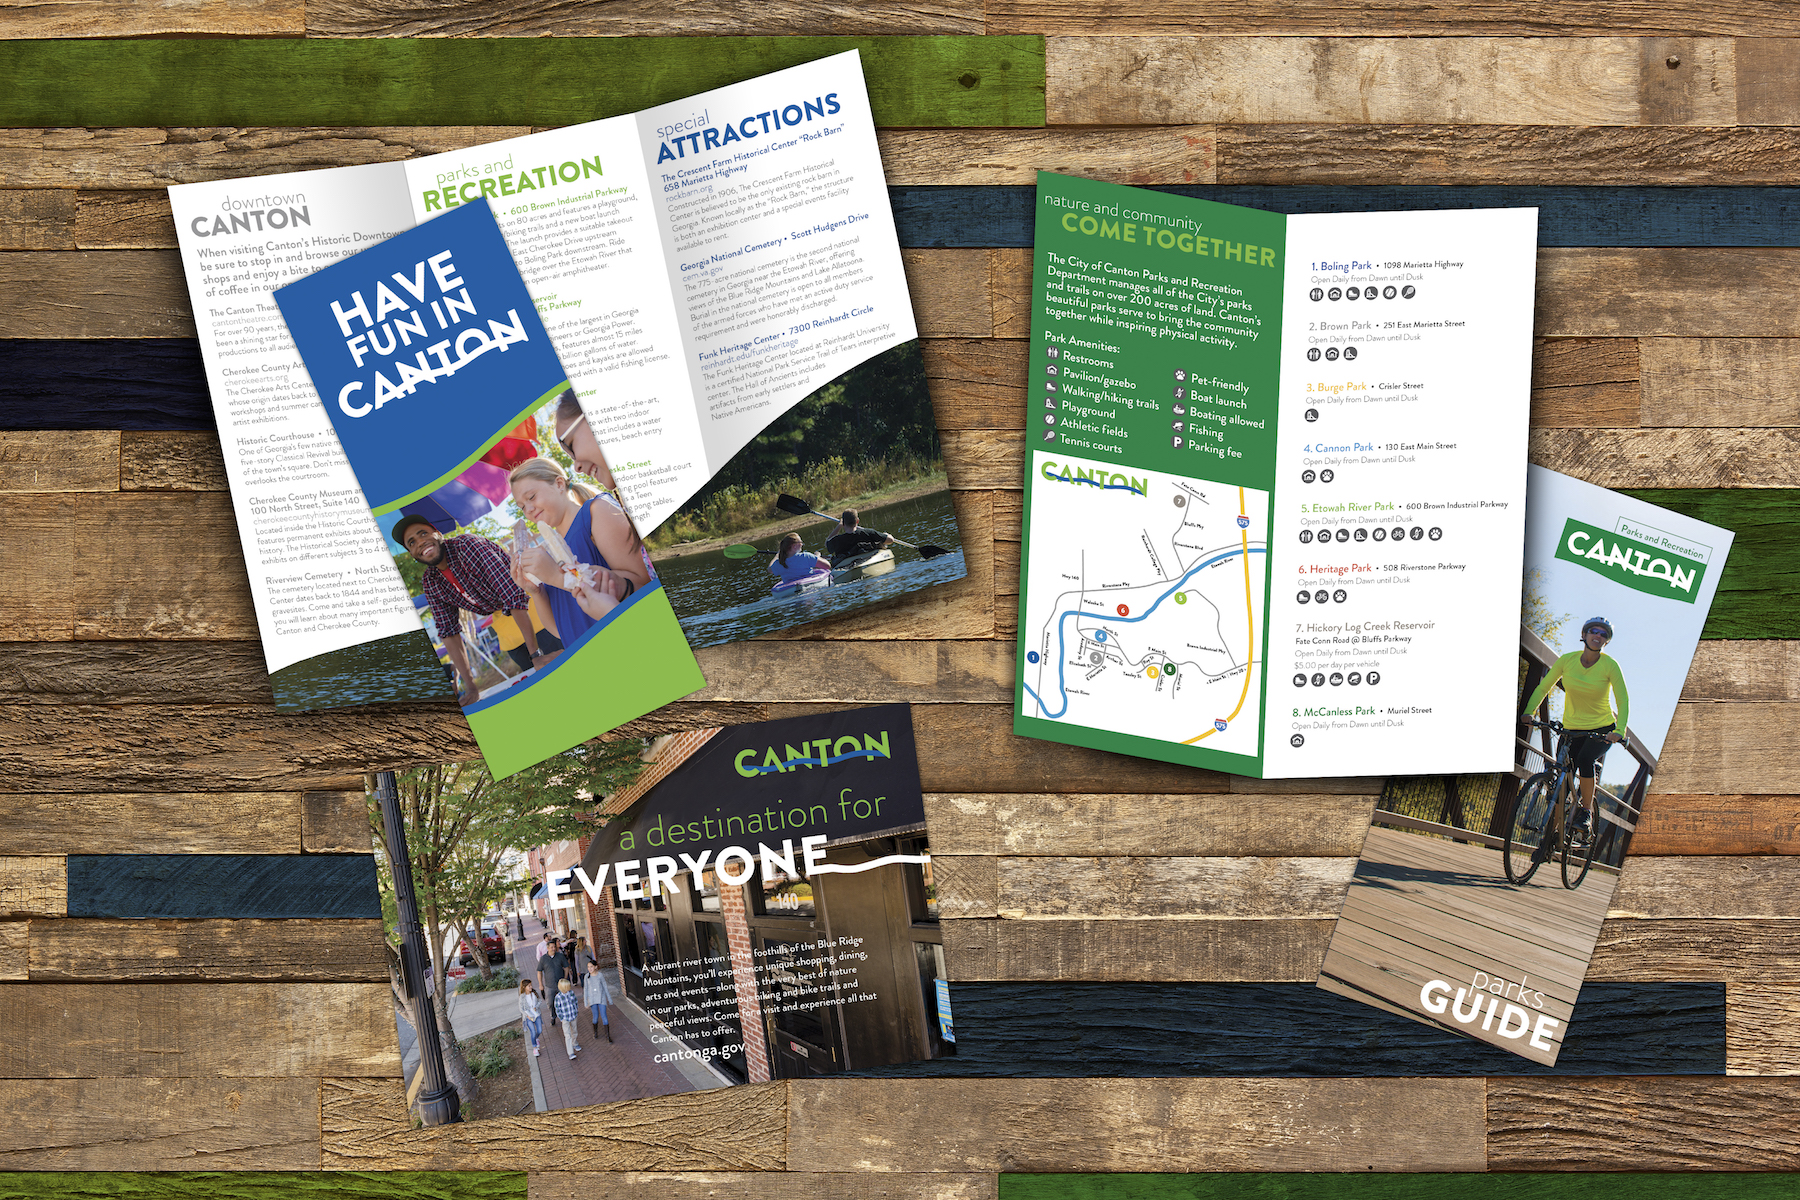 City of Canton Parks & Recreation Branding Materials Designed By id8